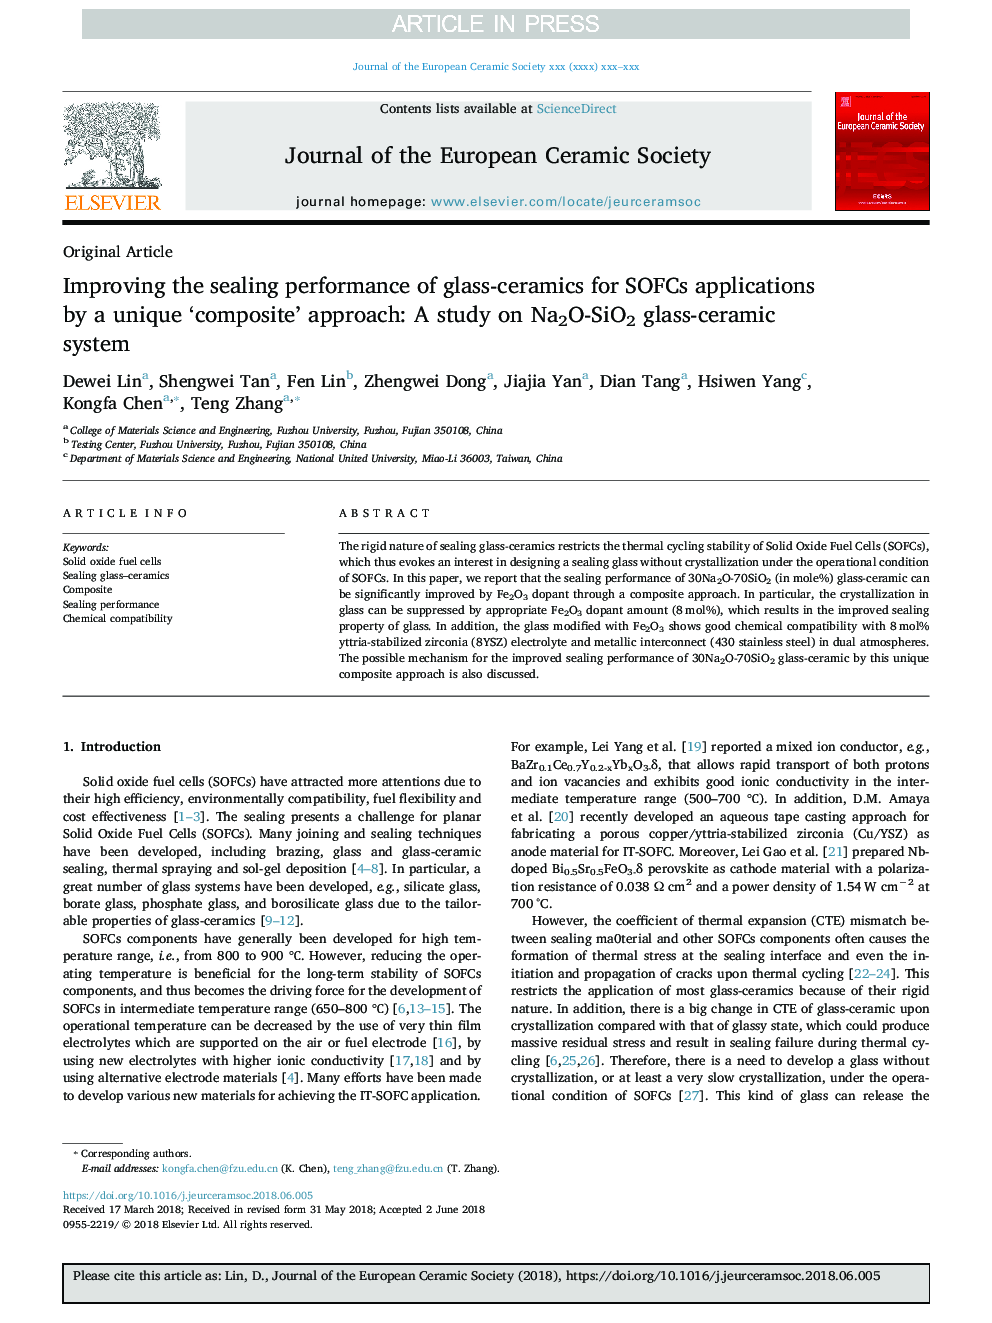 Improving the sealing performance of glass-ceramics for SOFCs applications by a unique 'composite' approach: A study on Na2O-SiO2 glass-ceramic system